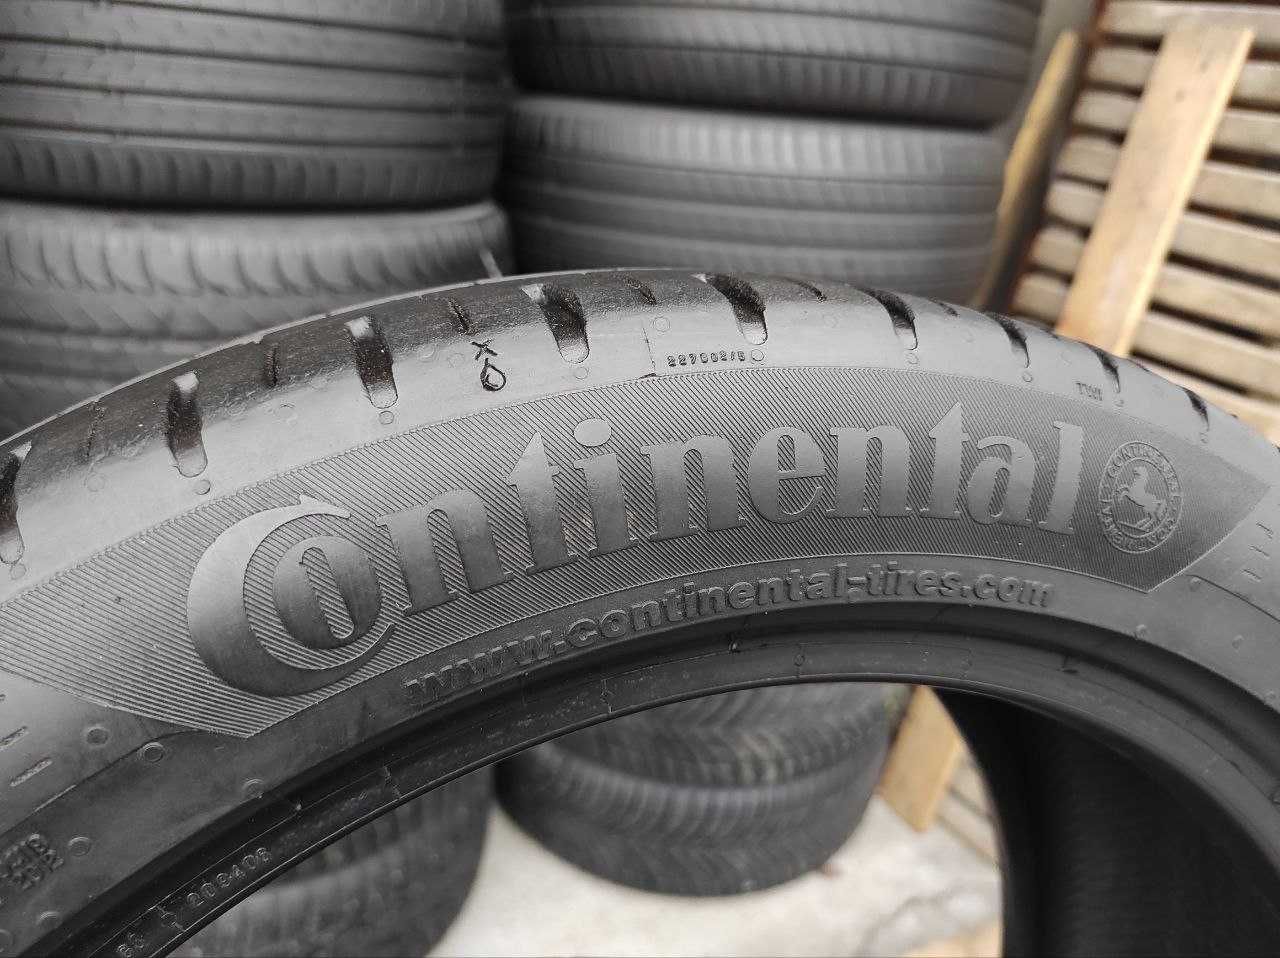 Continental Conti Eco Contact 5 215/45r17 made in Germany 16год 5,8-6м